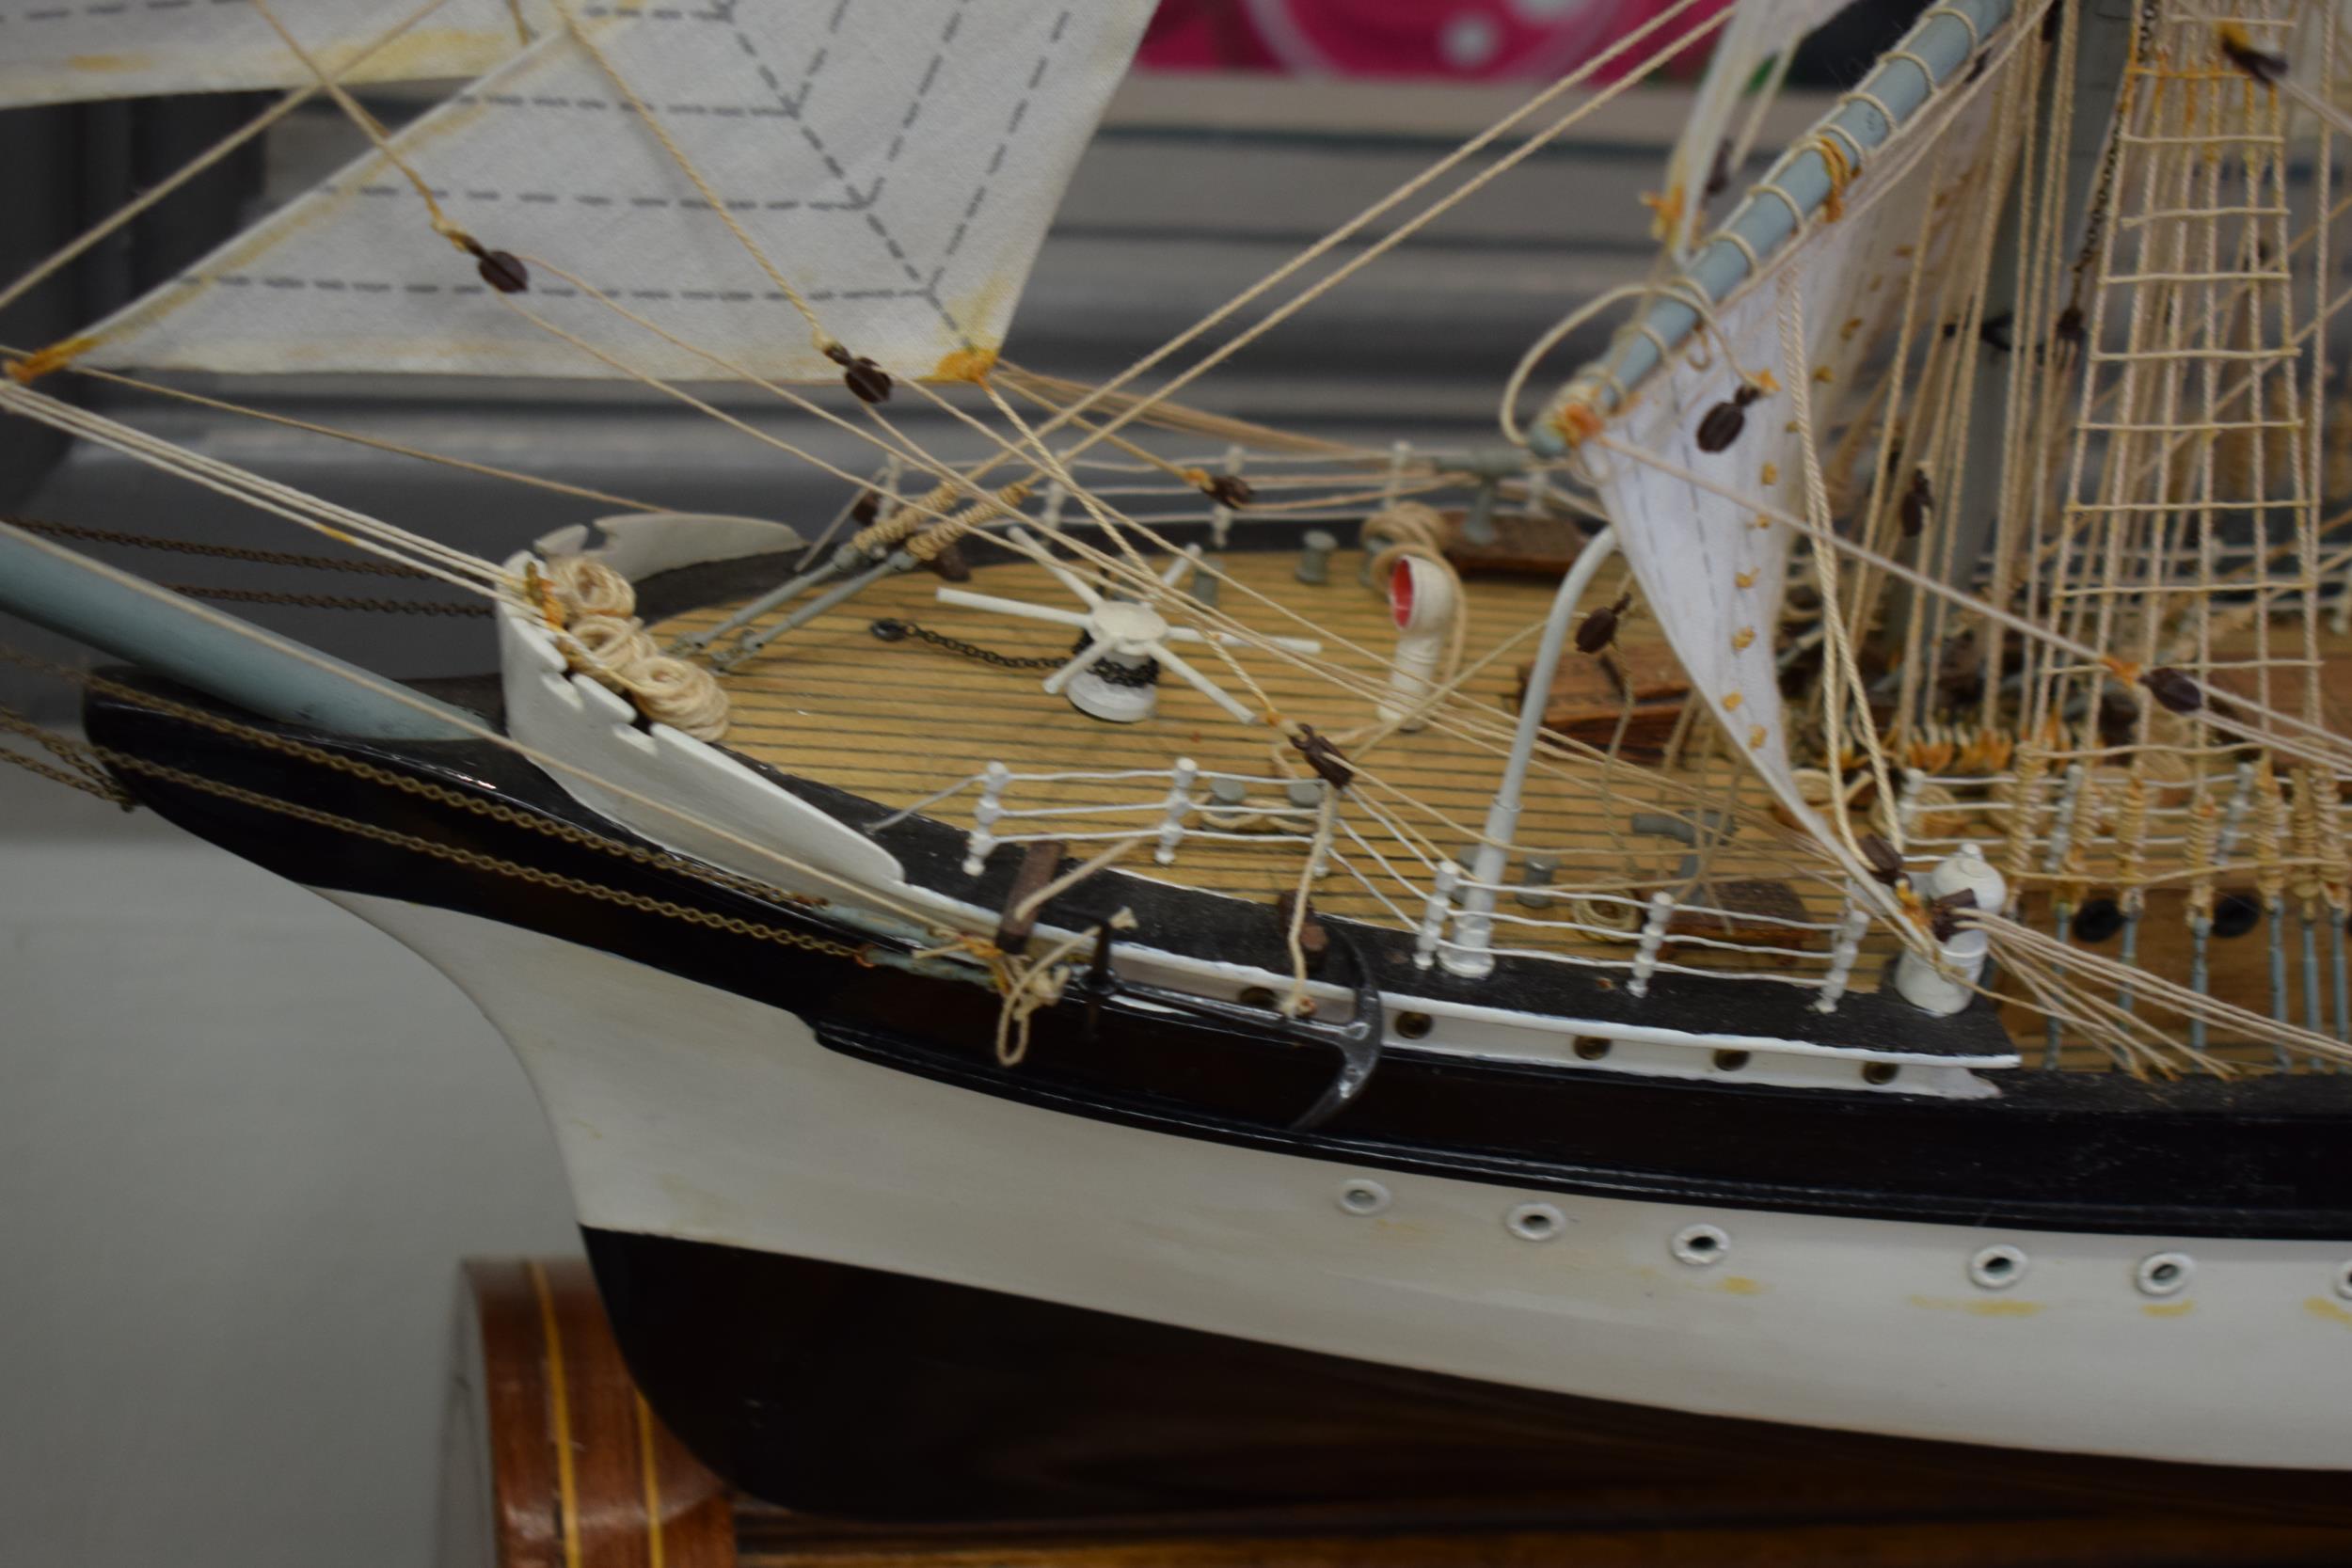 Kit built model of a sailing vessel / galleon, with German flag, mounted onto wooden stand, mostly - Image 8 of 10